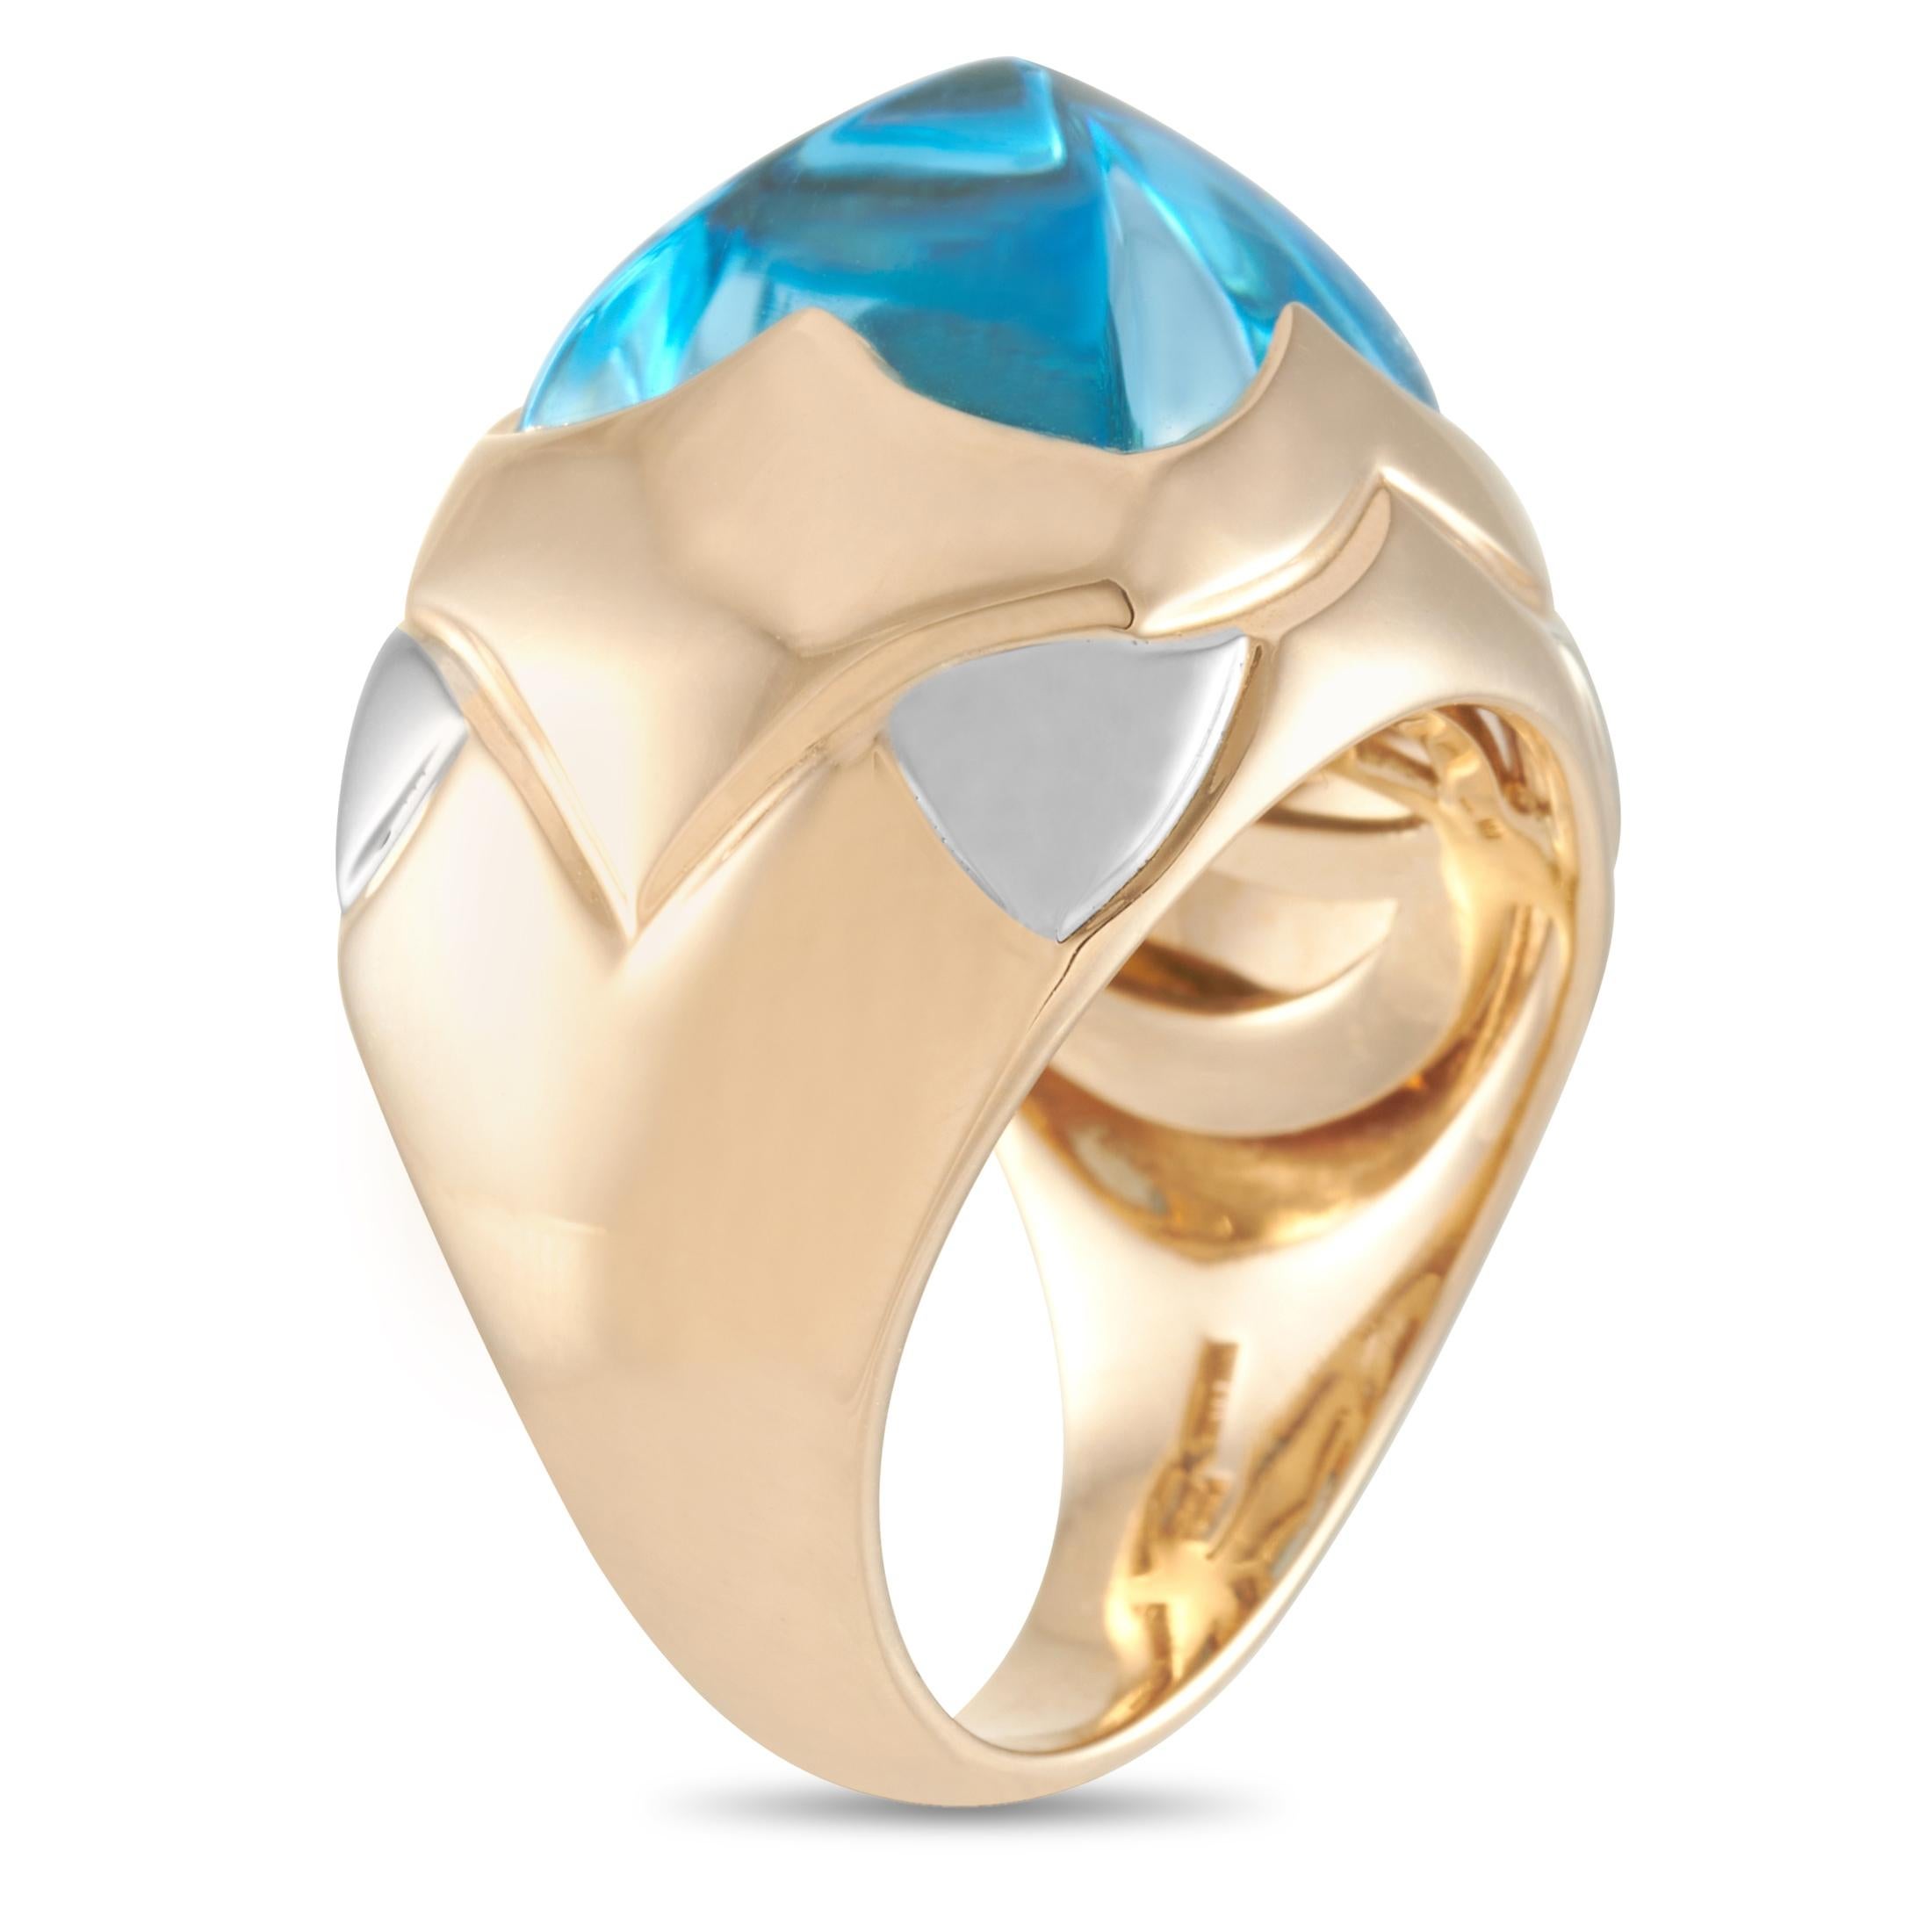 This Bvlgari ring is made out of 18K yellow and white gold and set with a pyramid topaz. The ring weighs 16.8 grams and boasts band thickness of 6 mm and top height of 13 mm, while top dimensions measure 16 by 15 mm.
 
 Offered in estate condition,